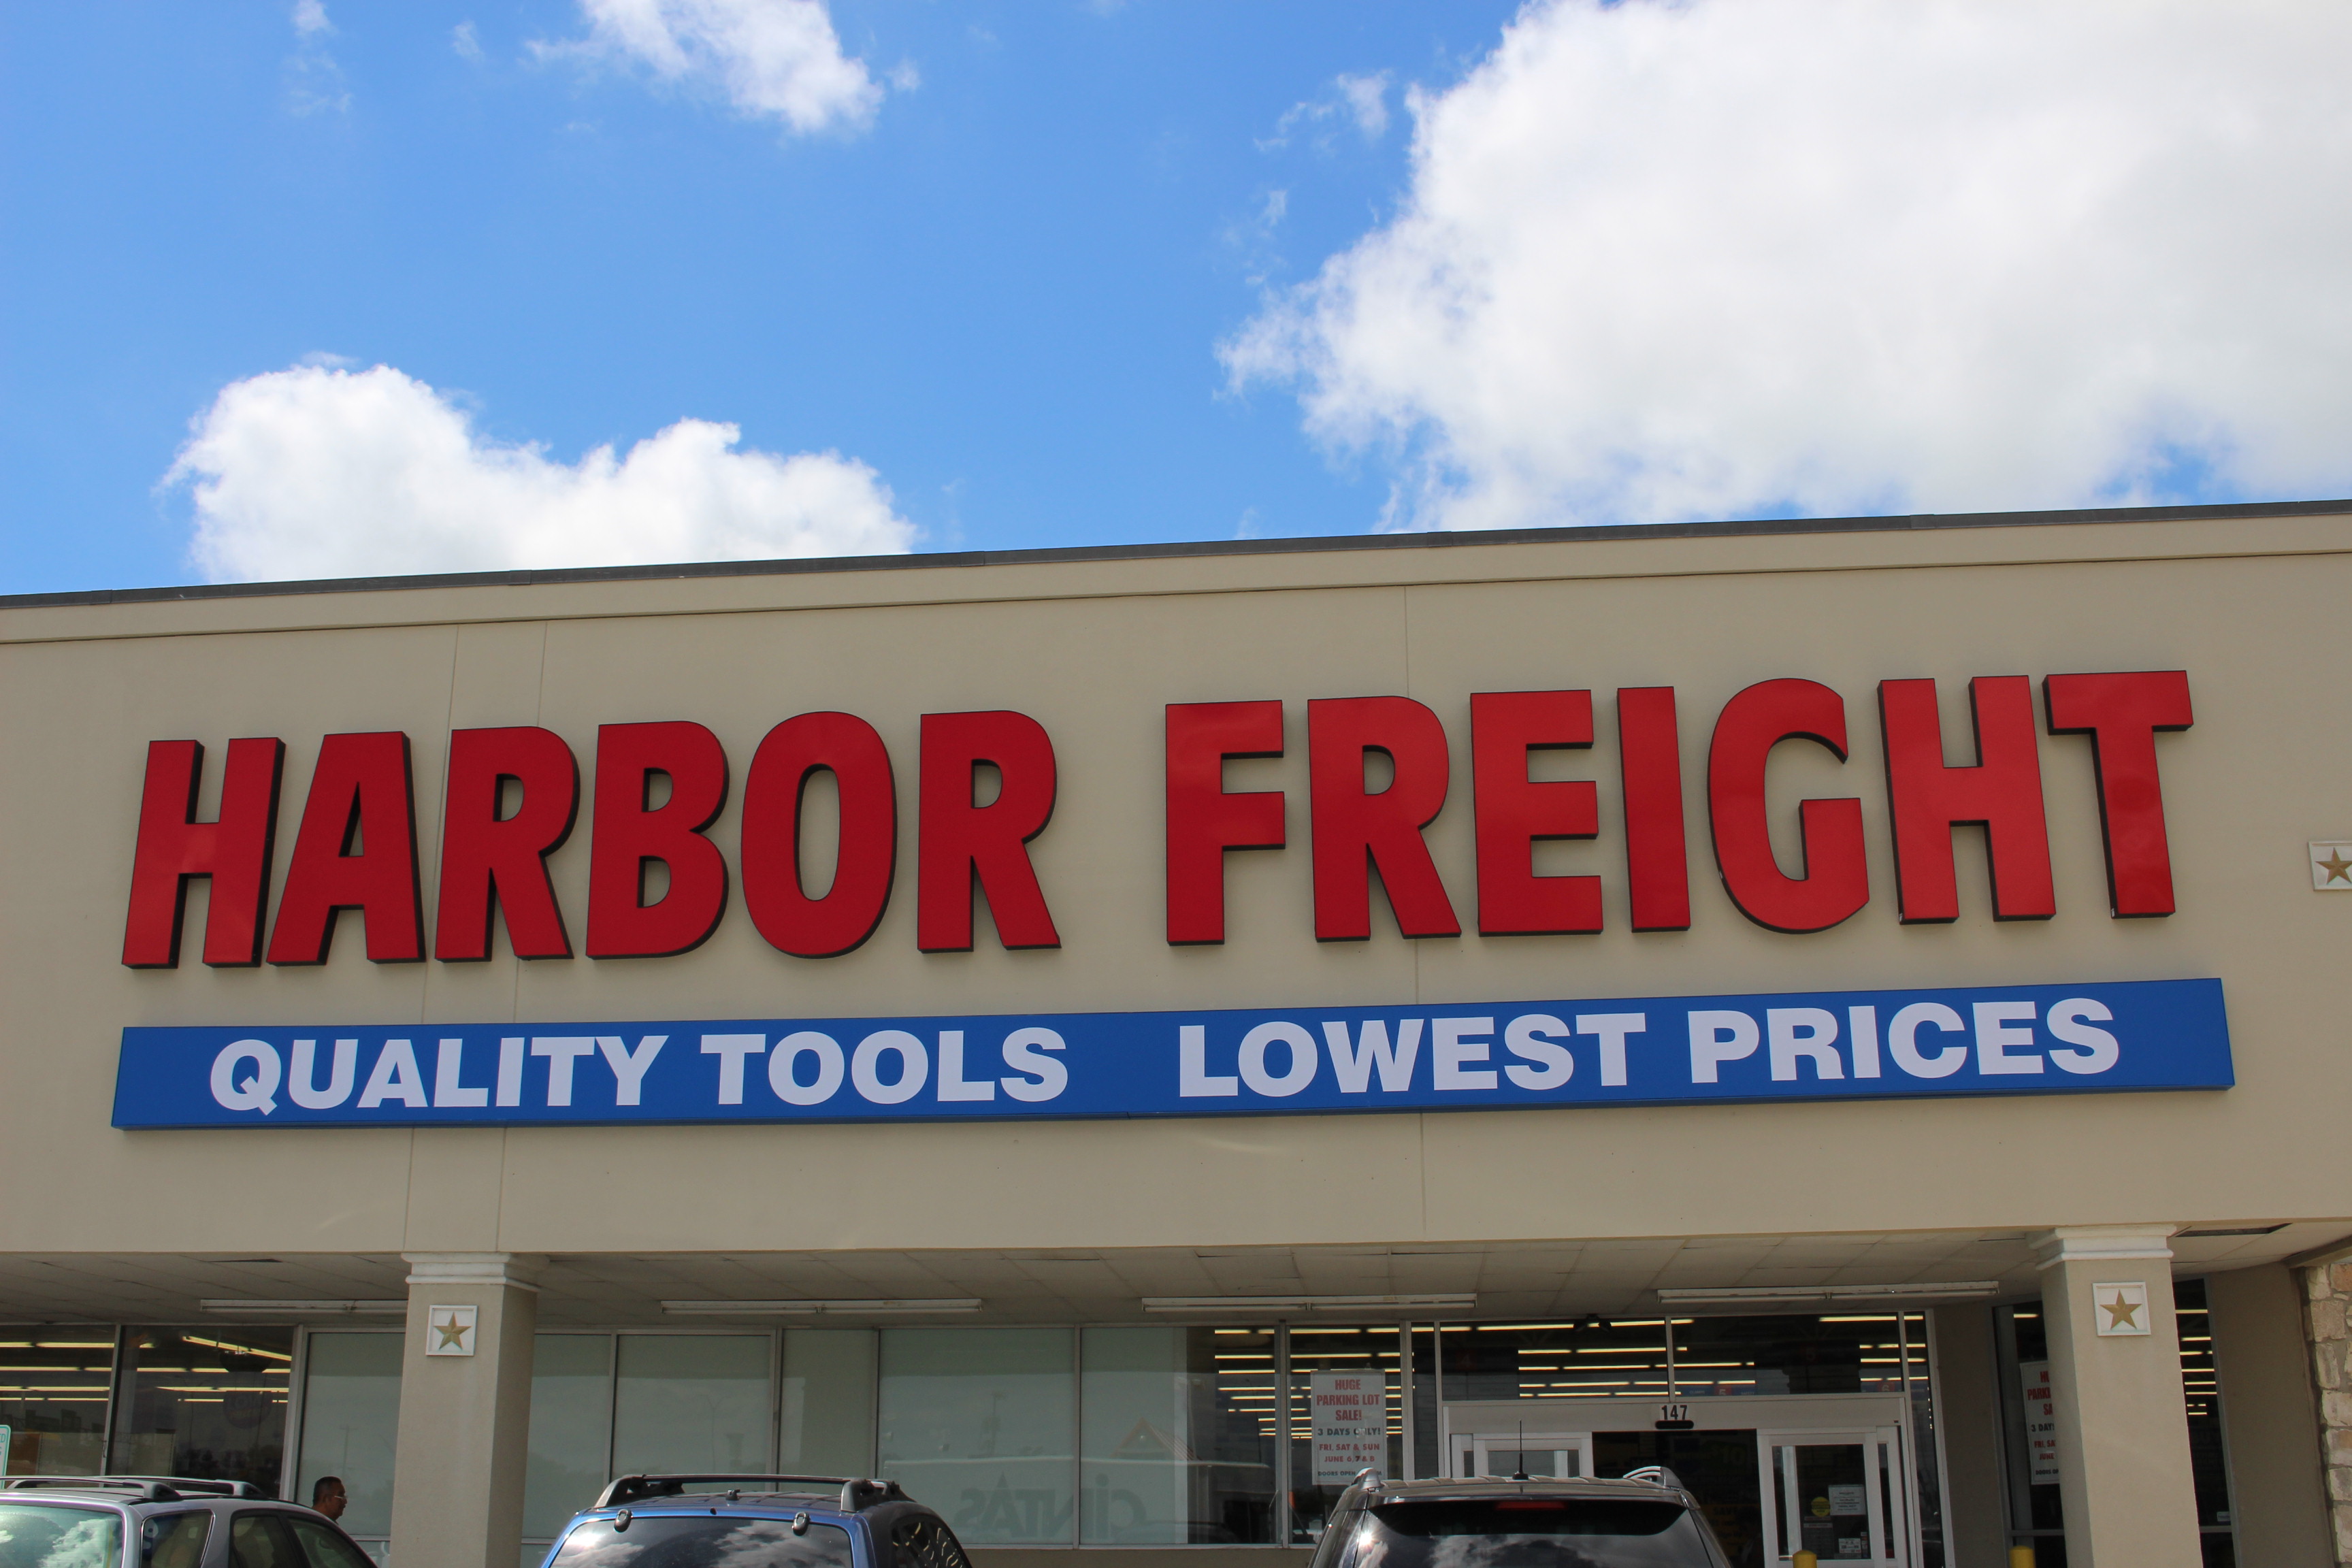 HARBOR FREIGHT HOURS What Time Does Harbor Freight CloseOpen?